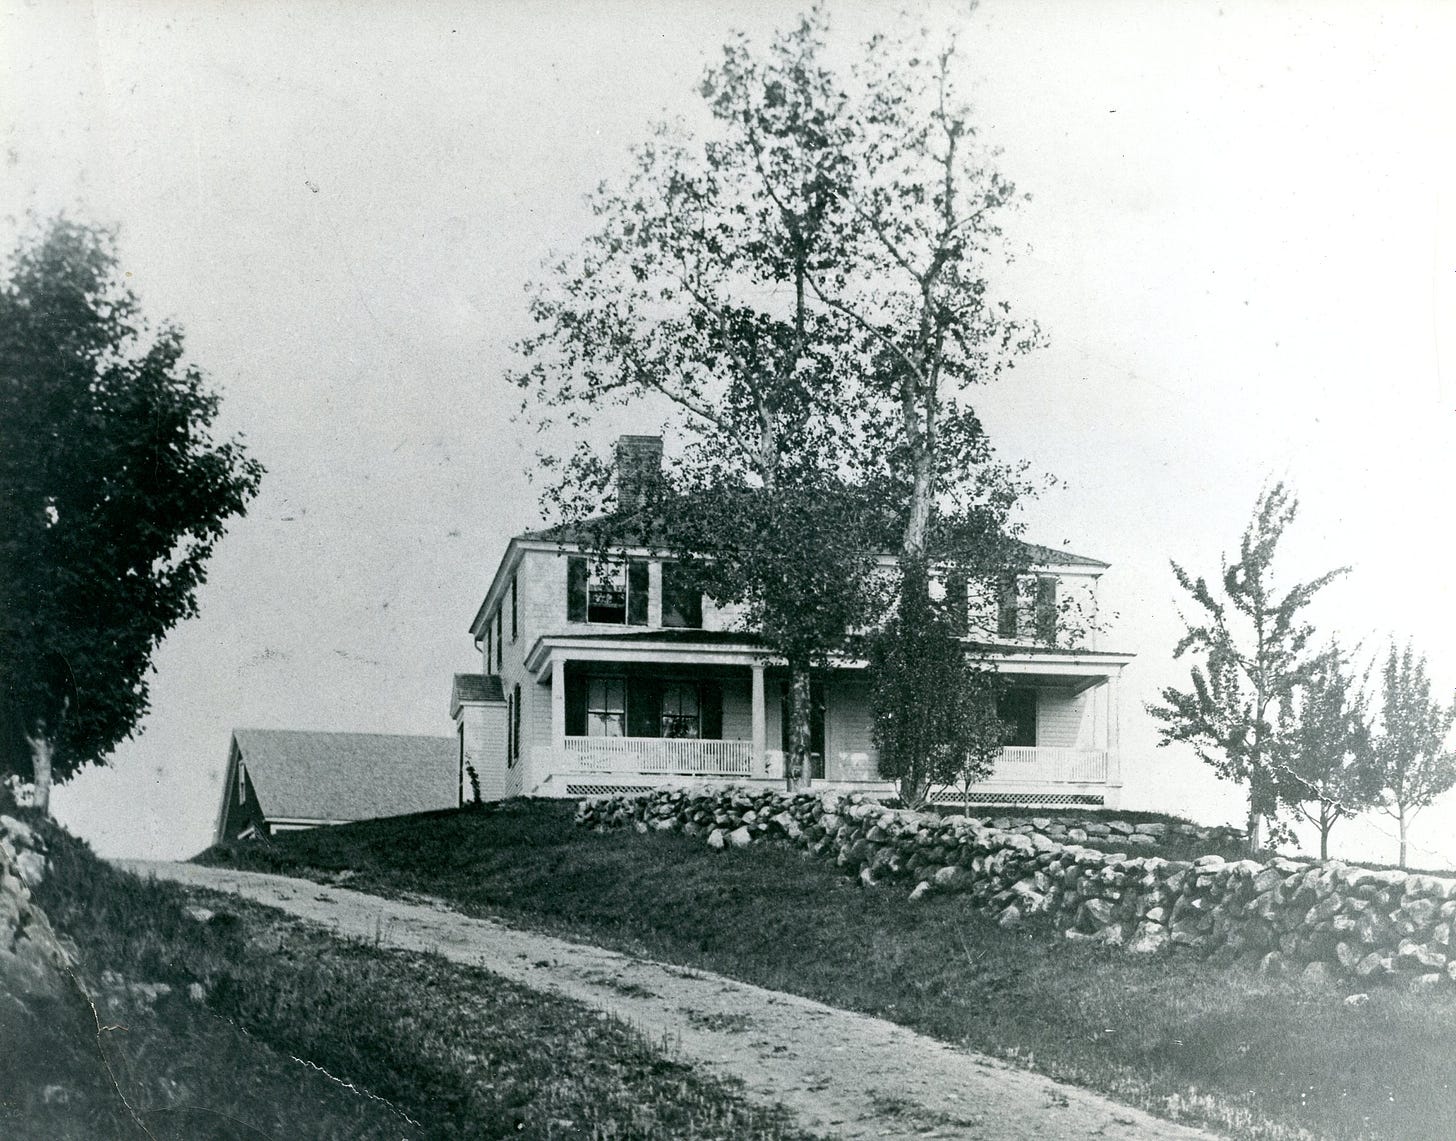 House with porch on hill